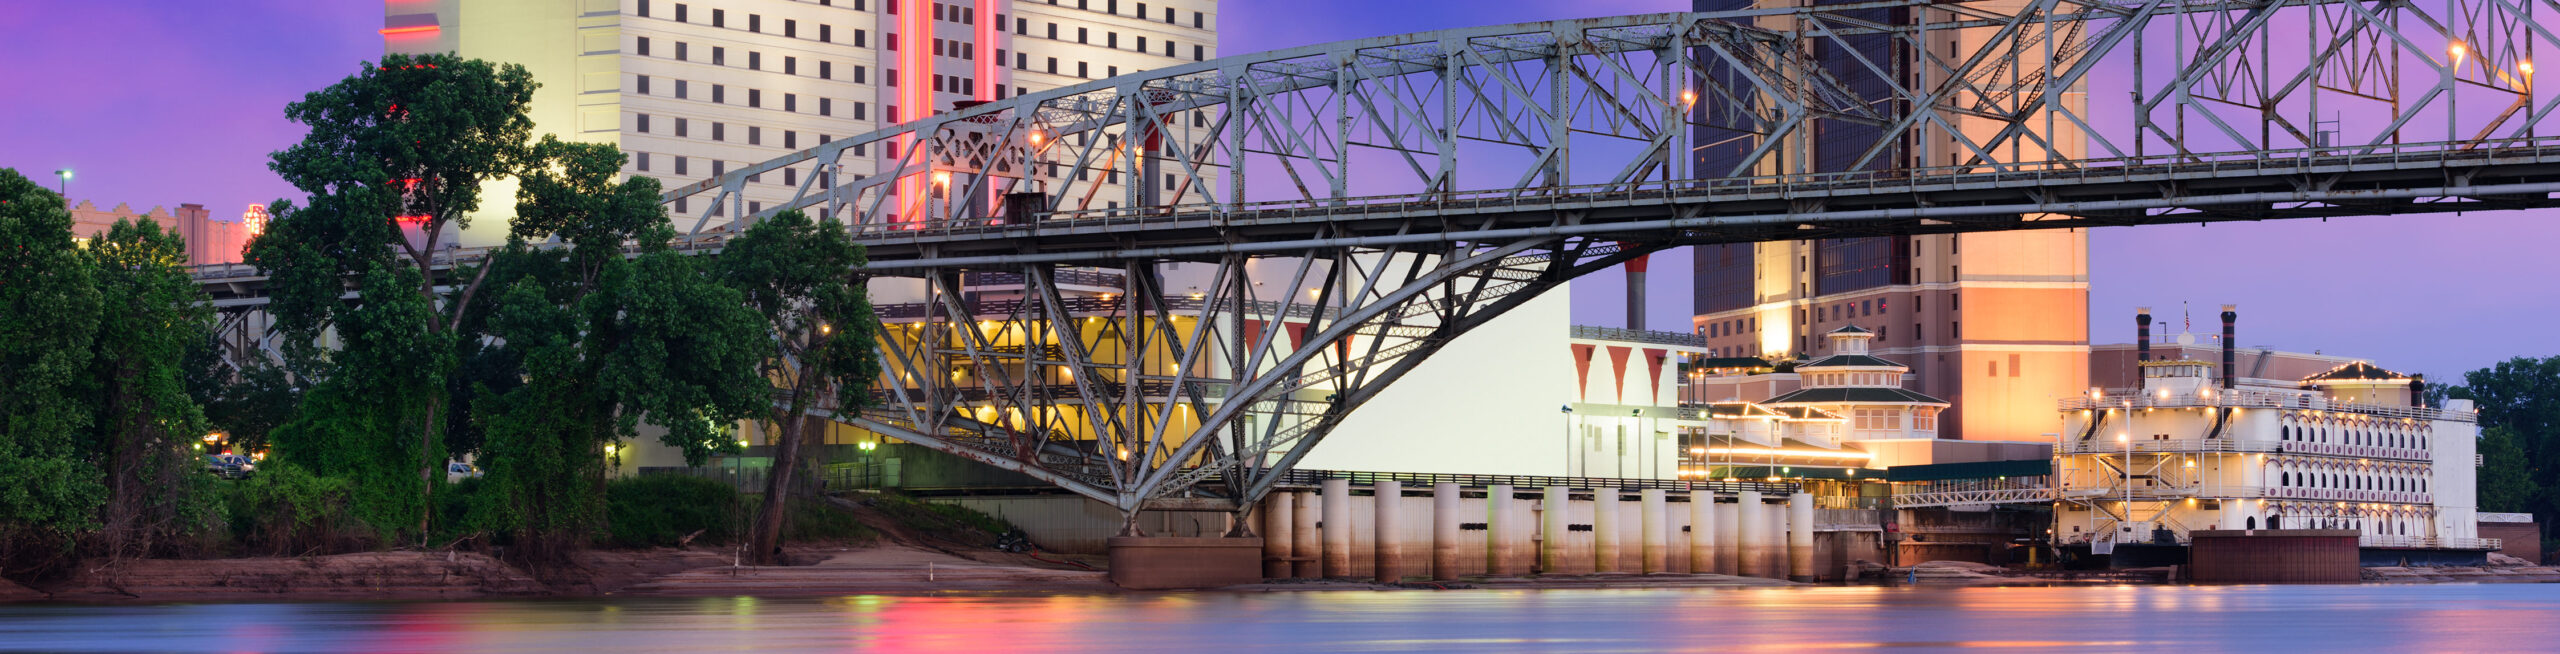 This is an image of downtown Shreveport where ASTA-USA provides professional translation services.